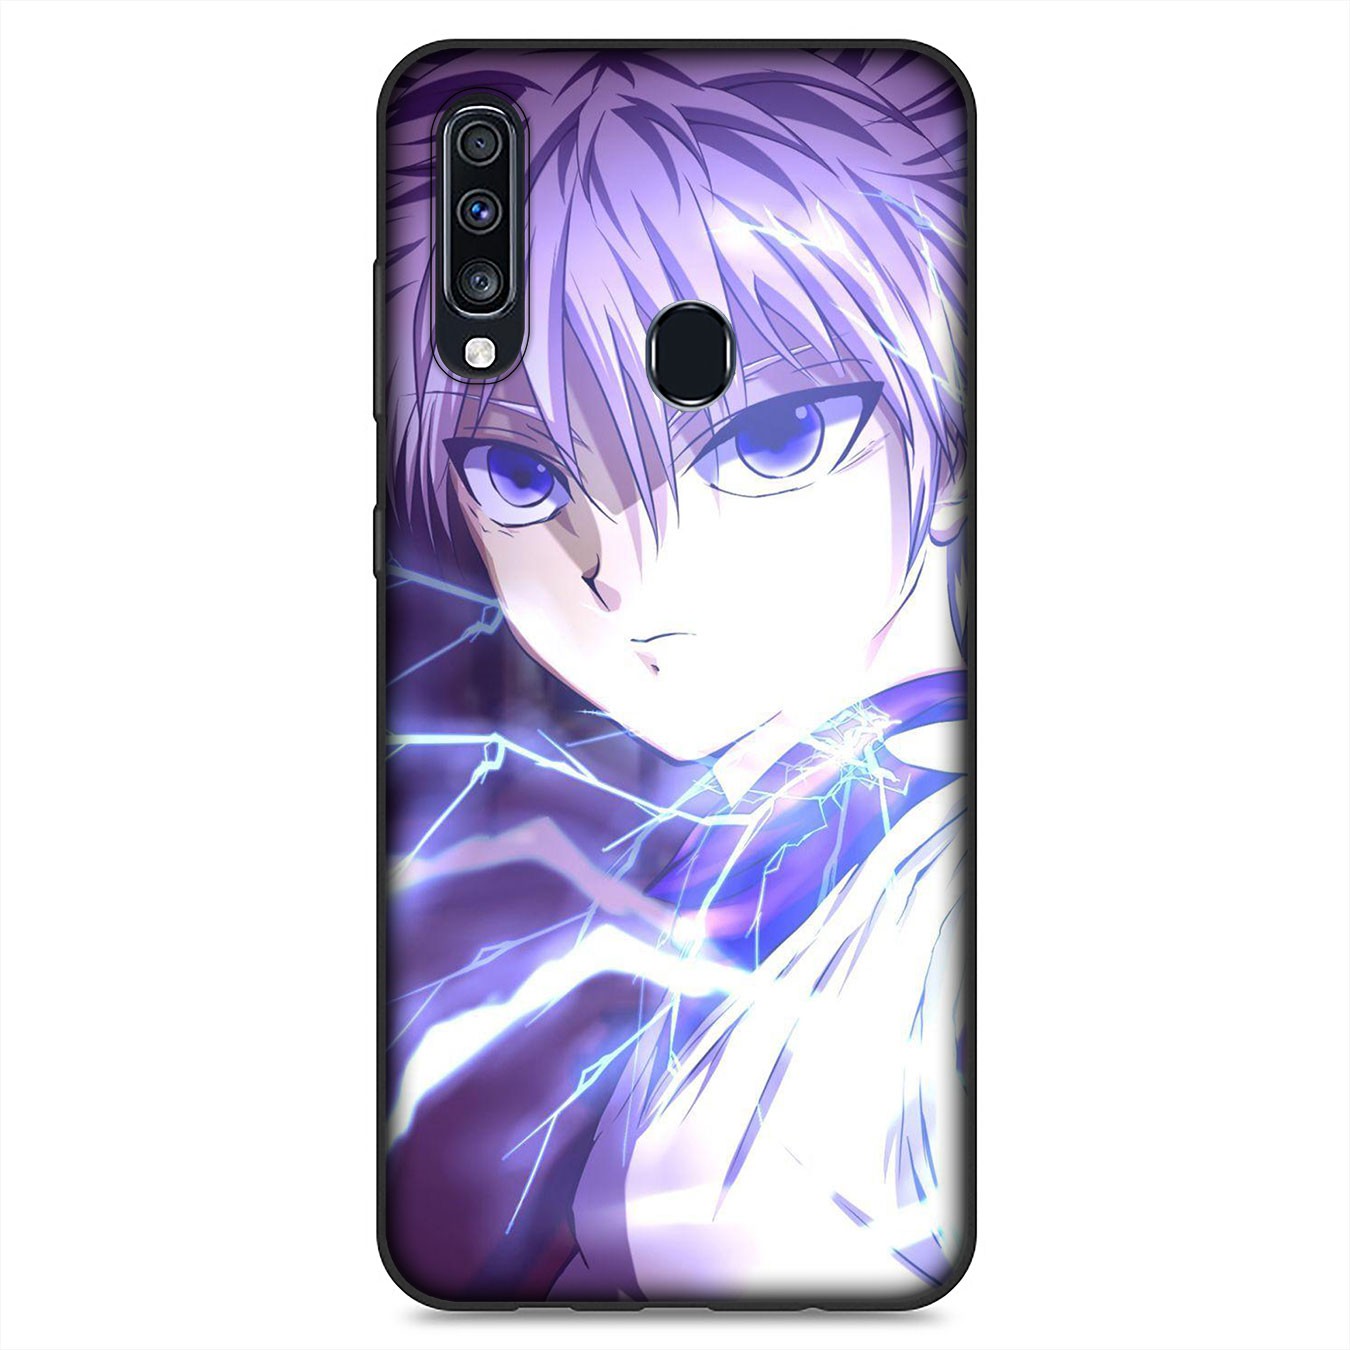 Huawei P30 Pro Lite Y6 Y7 Y9 Prime 2019 2018 Y9Prime Casing Soft Silicone Phone Case Hunter x Hunter GON FREECSS Cover